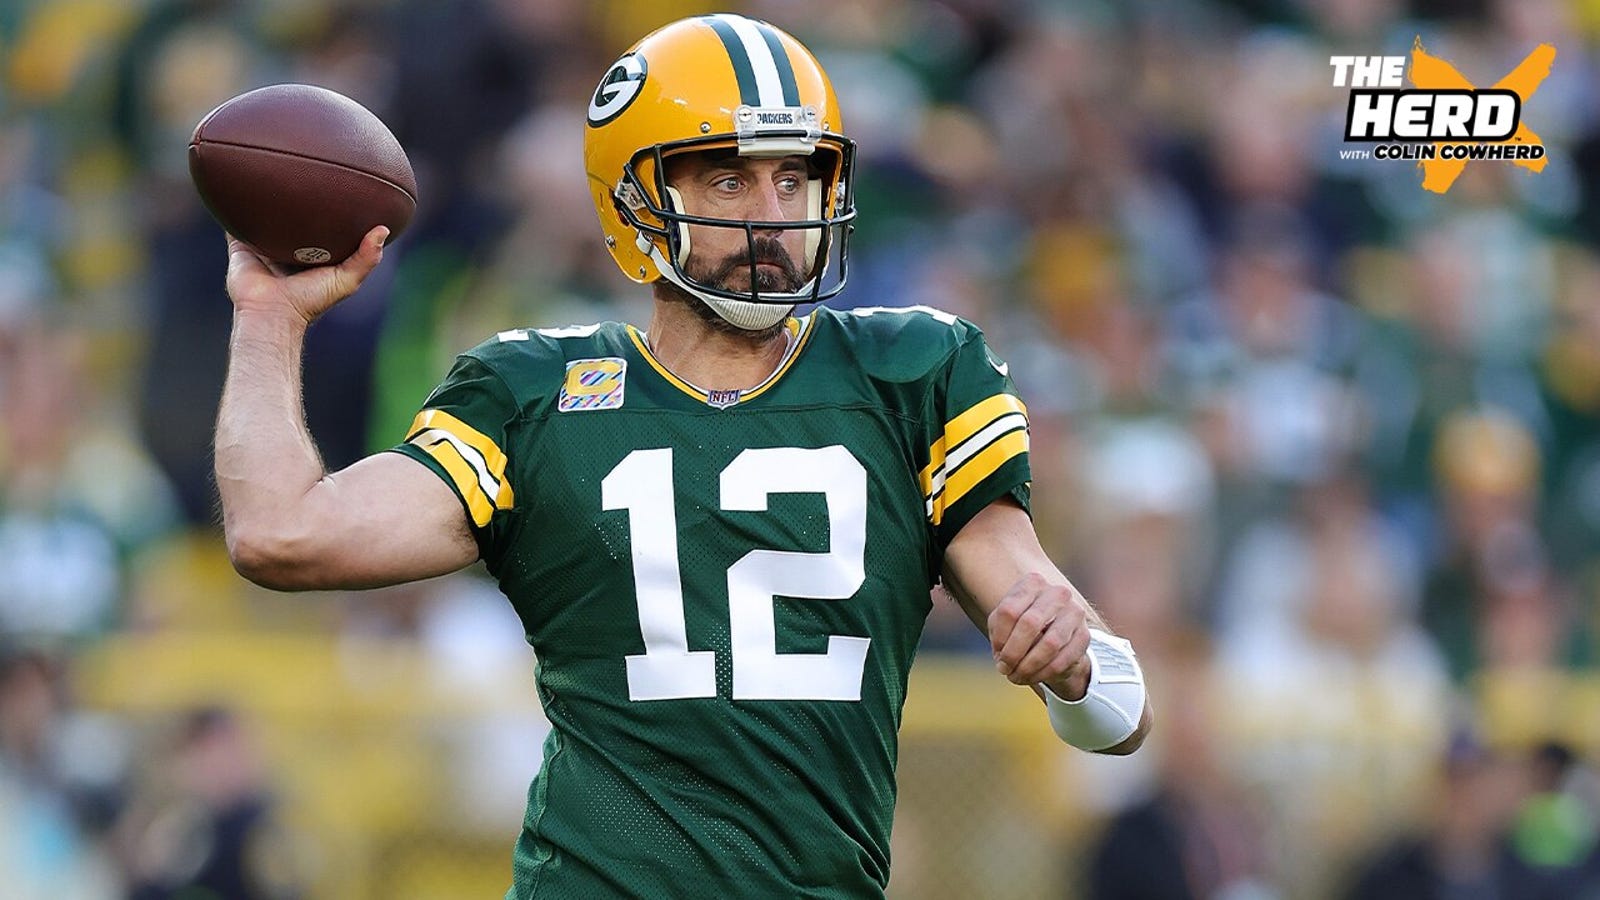 Are the Packers legit contenders?